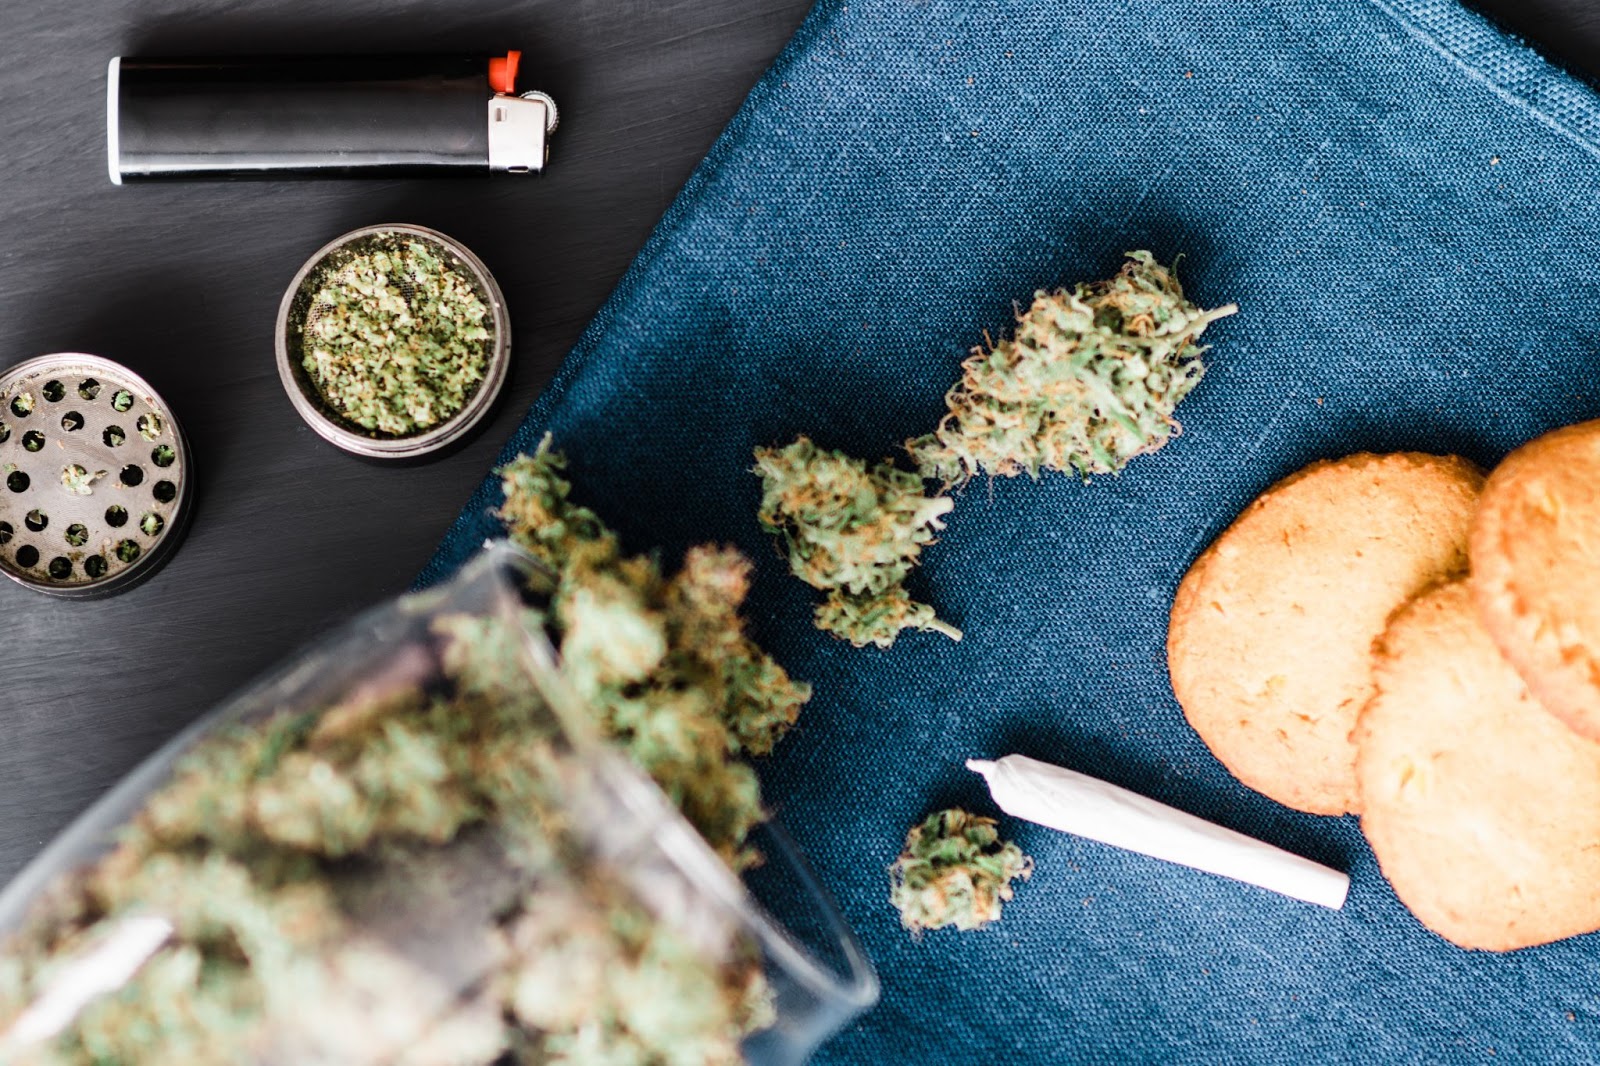 Smoking vs. Edibles Whats Right for You